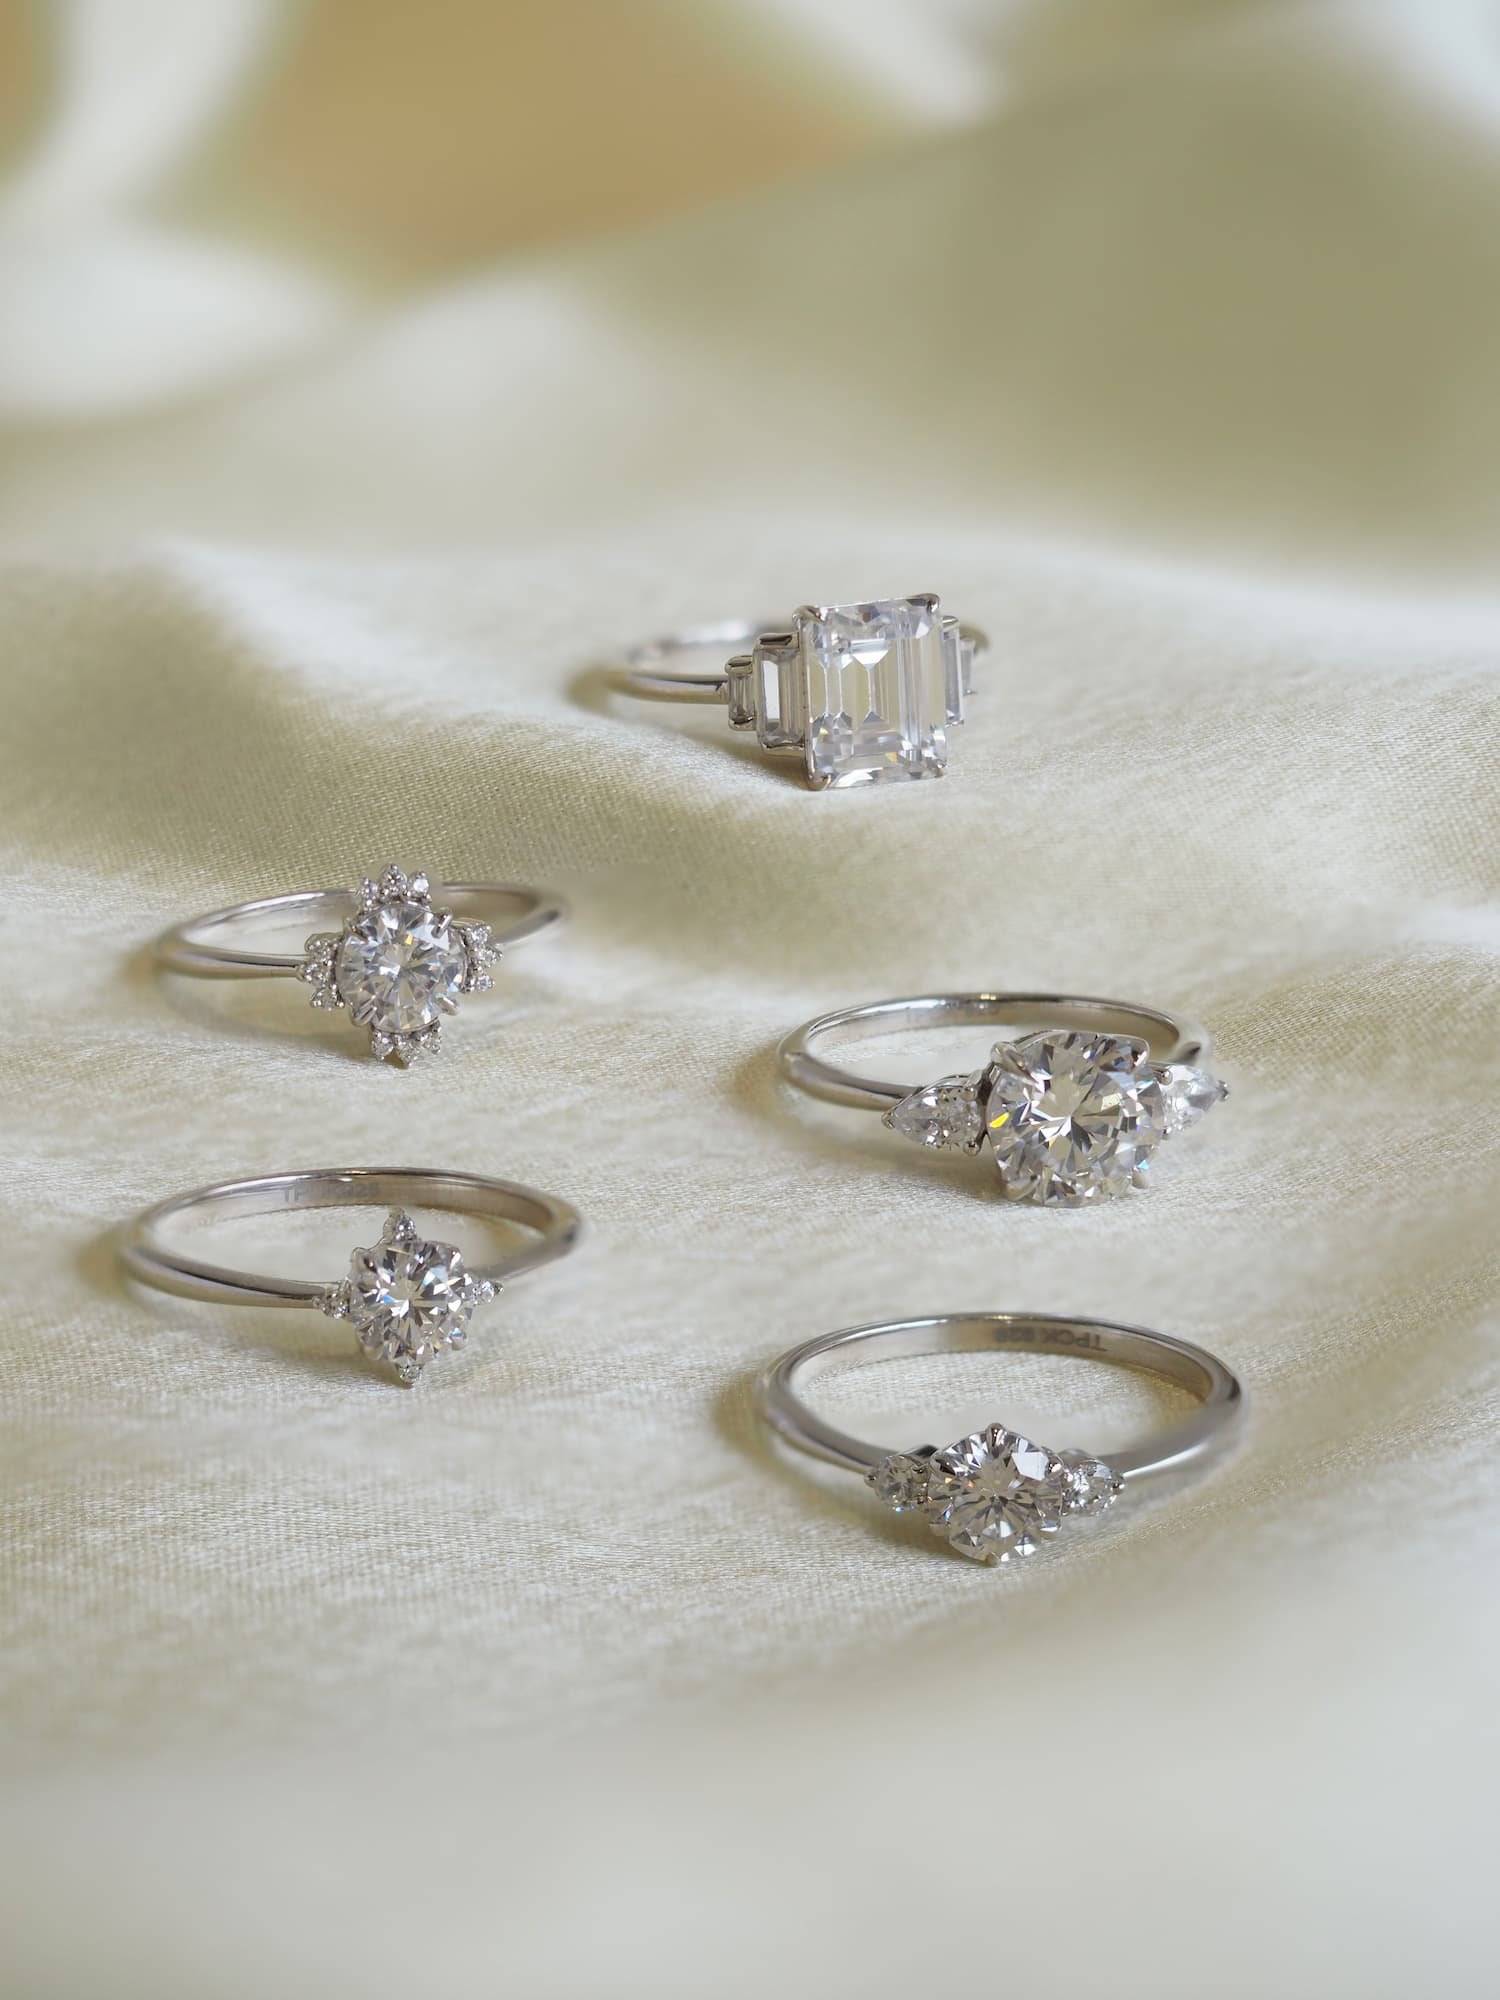 The most gorgeous Diamond Engagement Rings